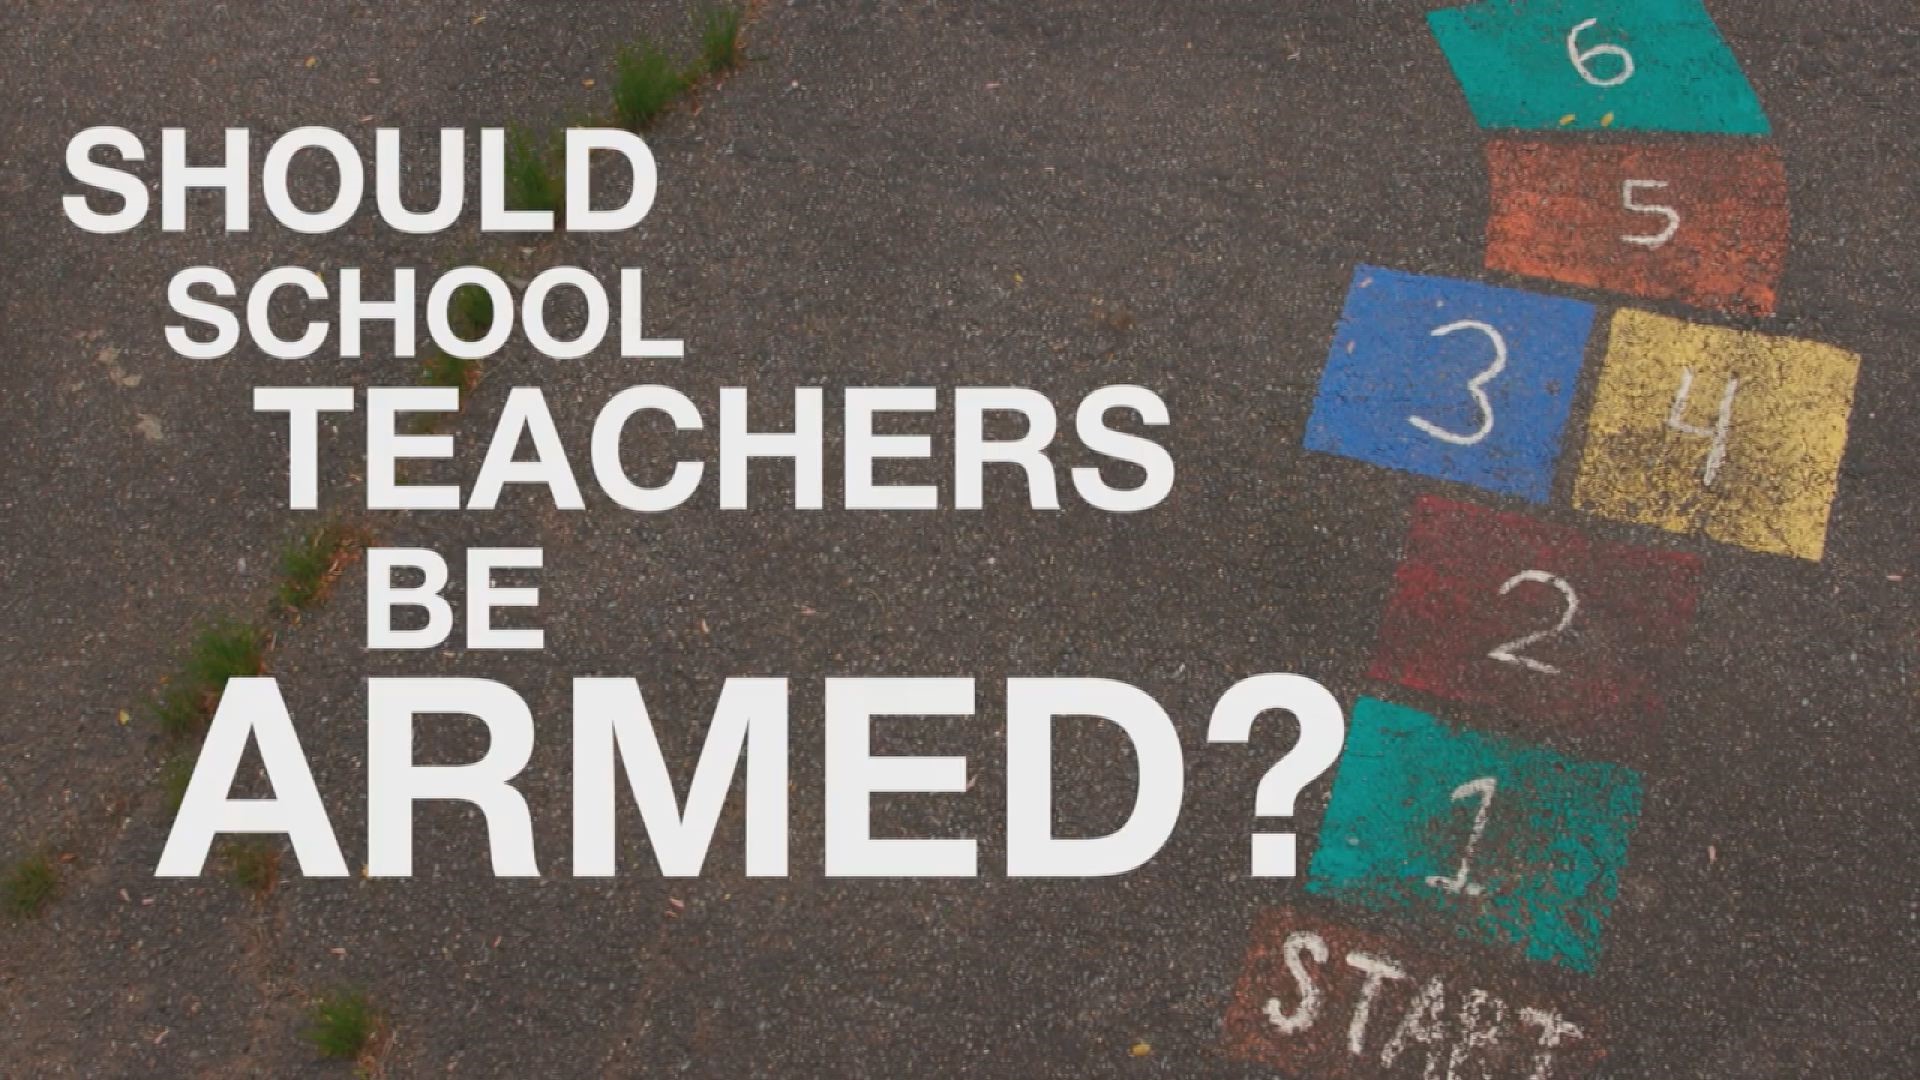 Some school districts are arming teachers. Some believe that’s not the solution.